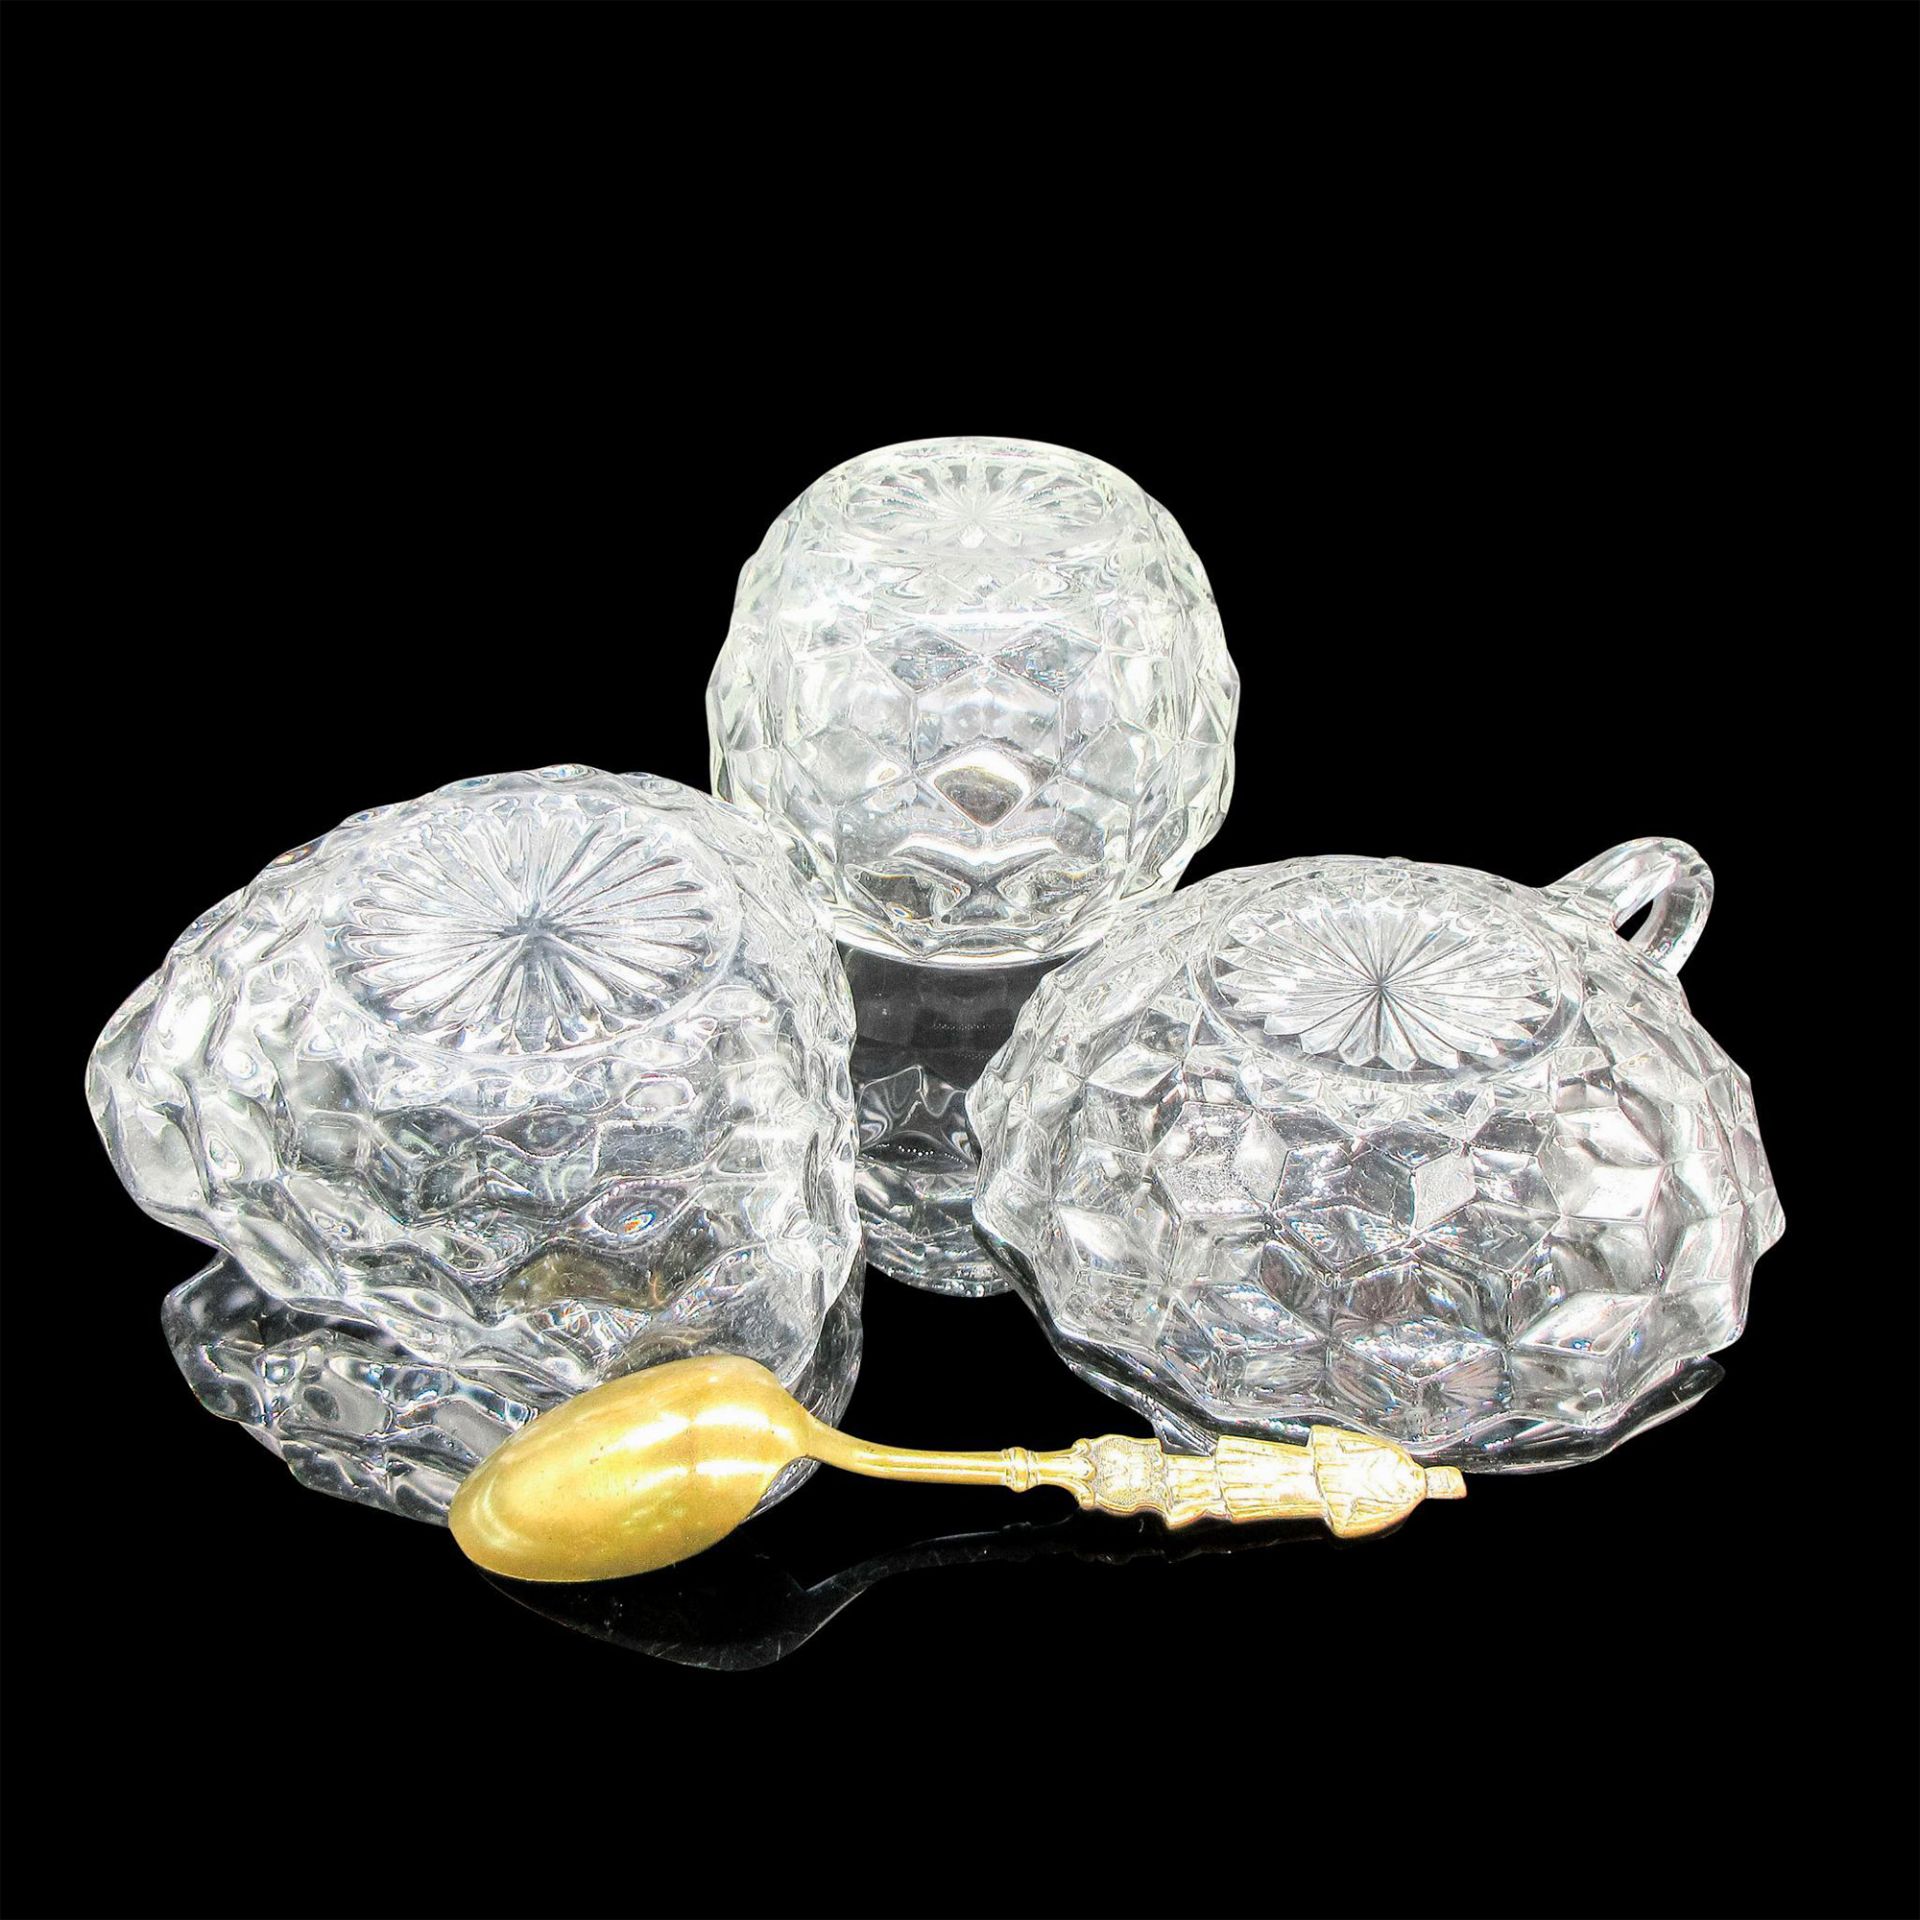 4pc Fostoria Glass Dishes, American Pattern - Image 3 of 3